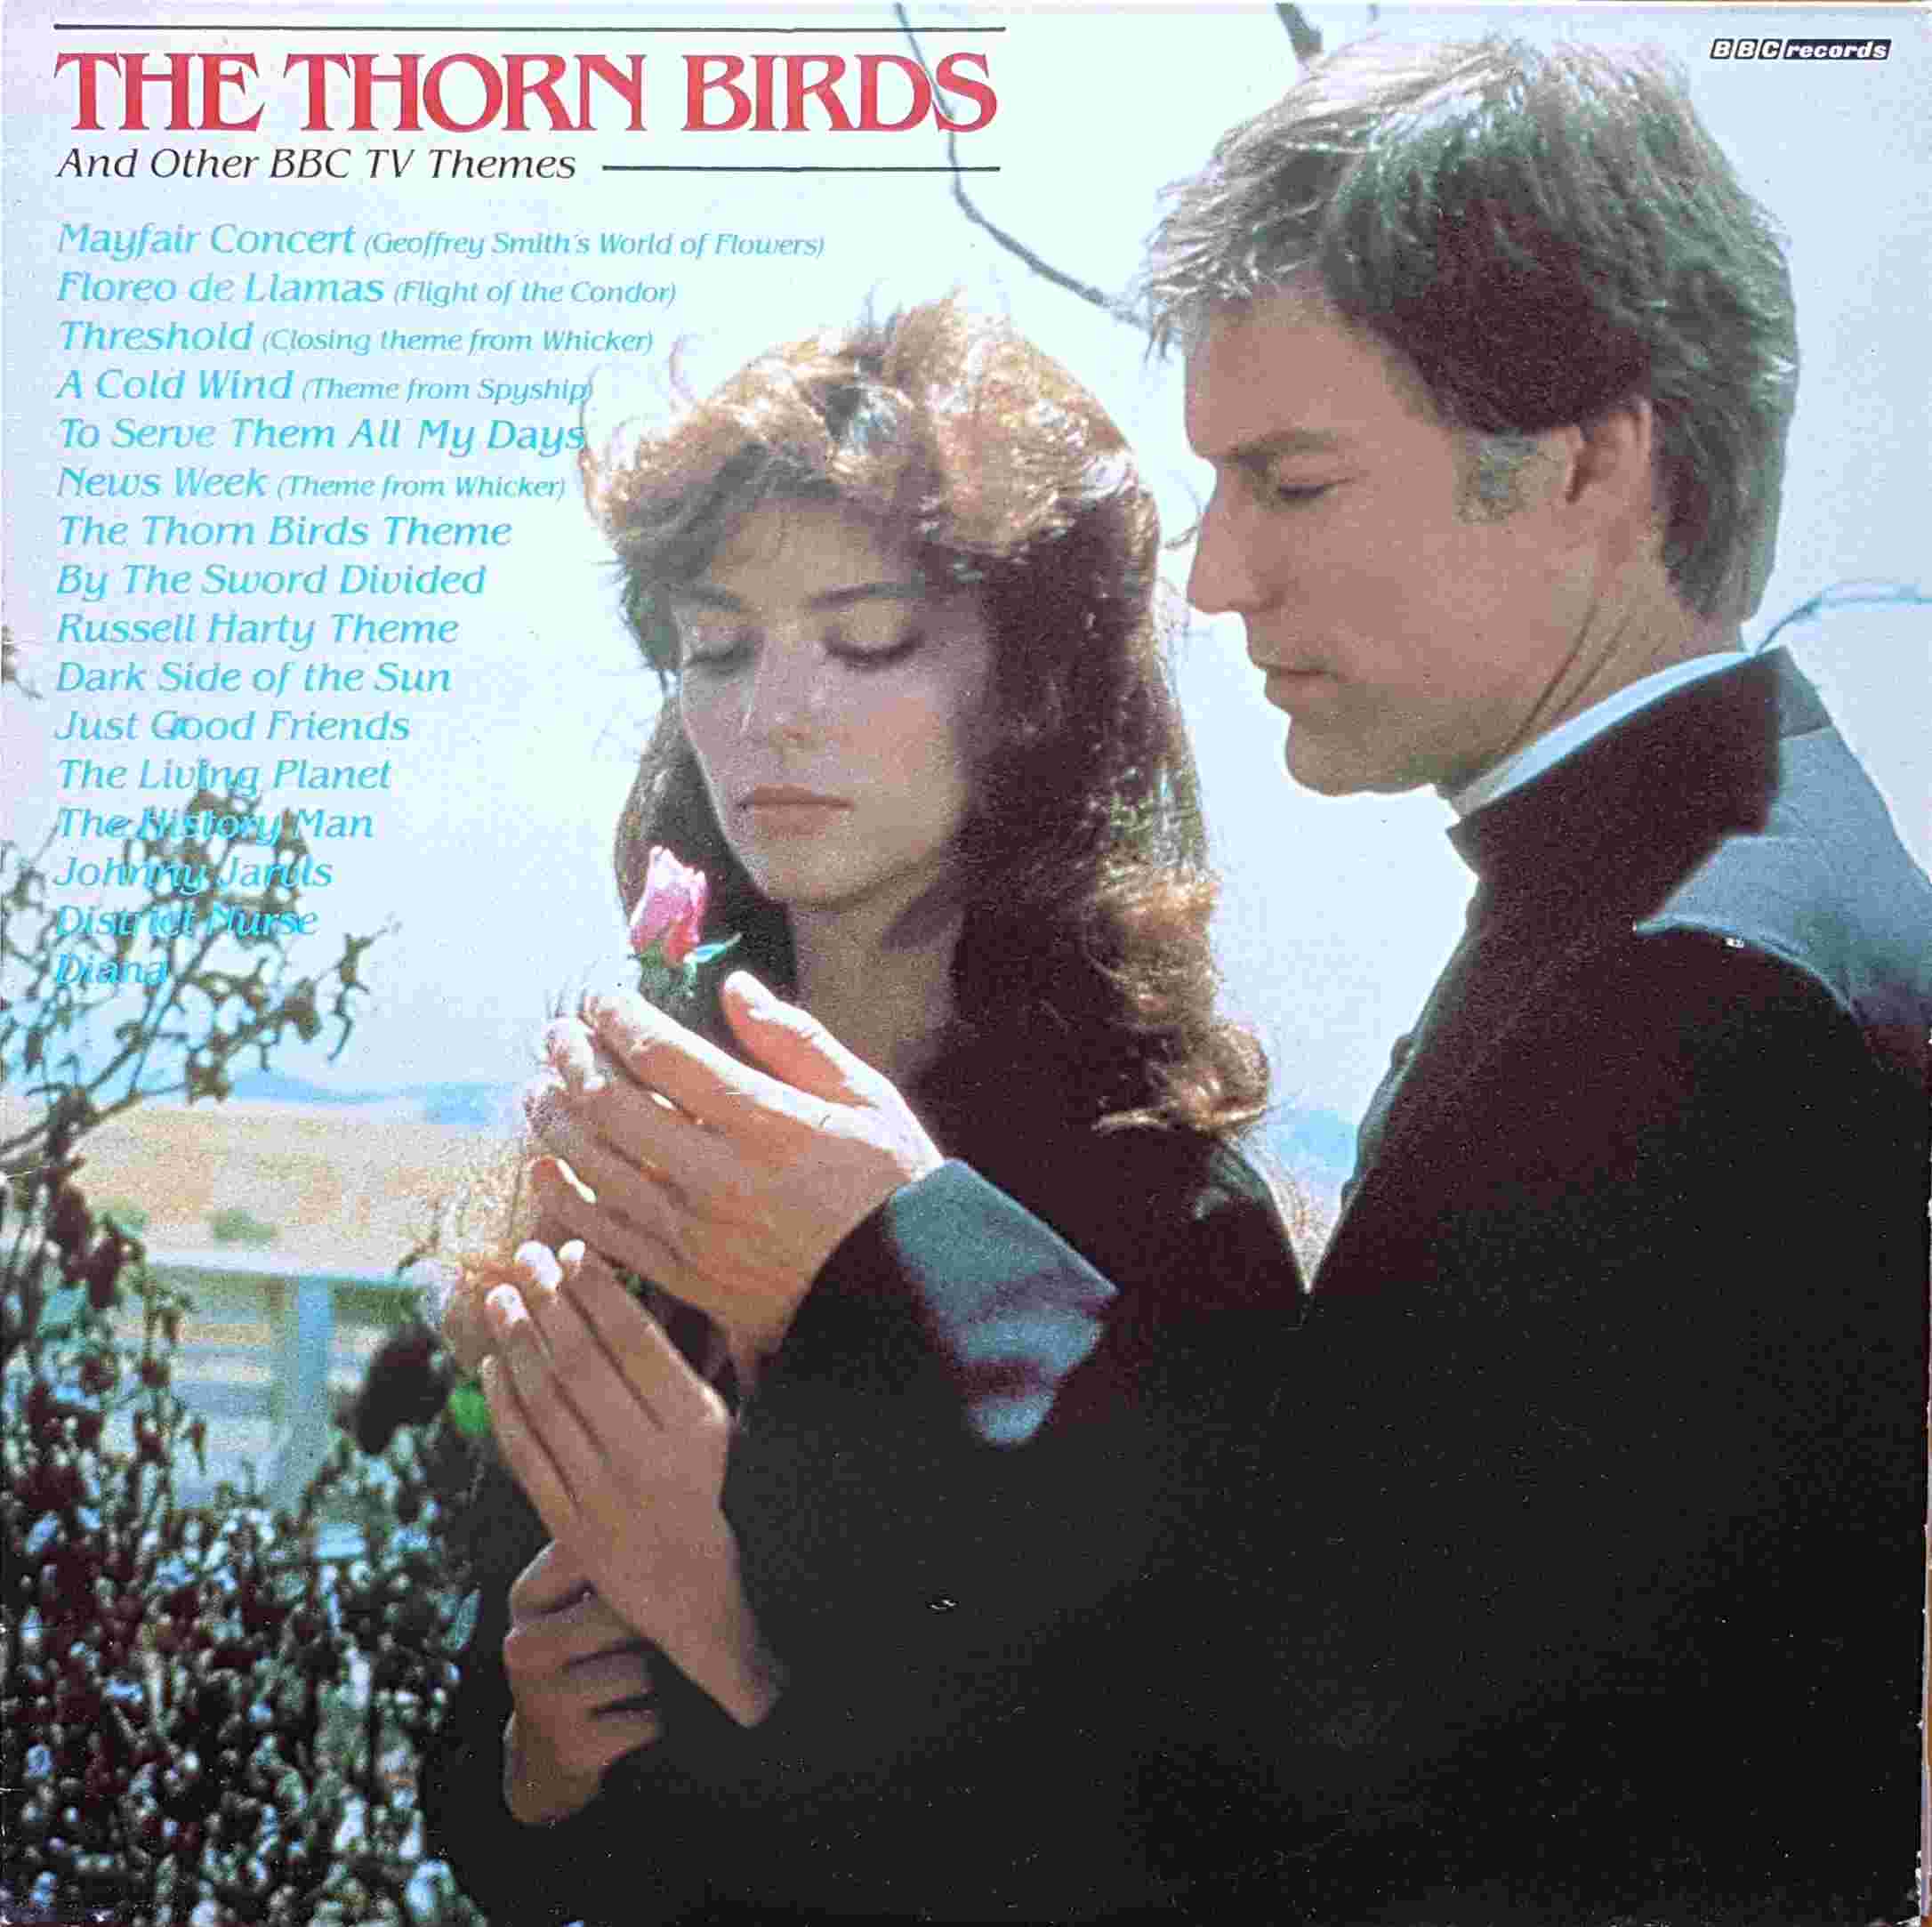 Picture of REH 524 The thorn birds and other BBC themes by artist Various from the BBC albums - Records and Tapes library